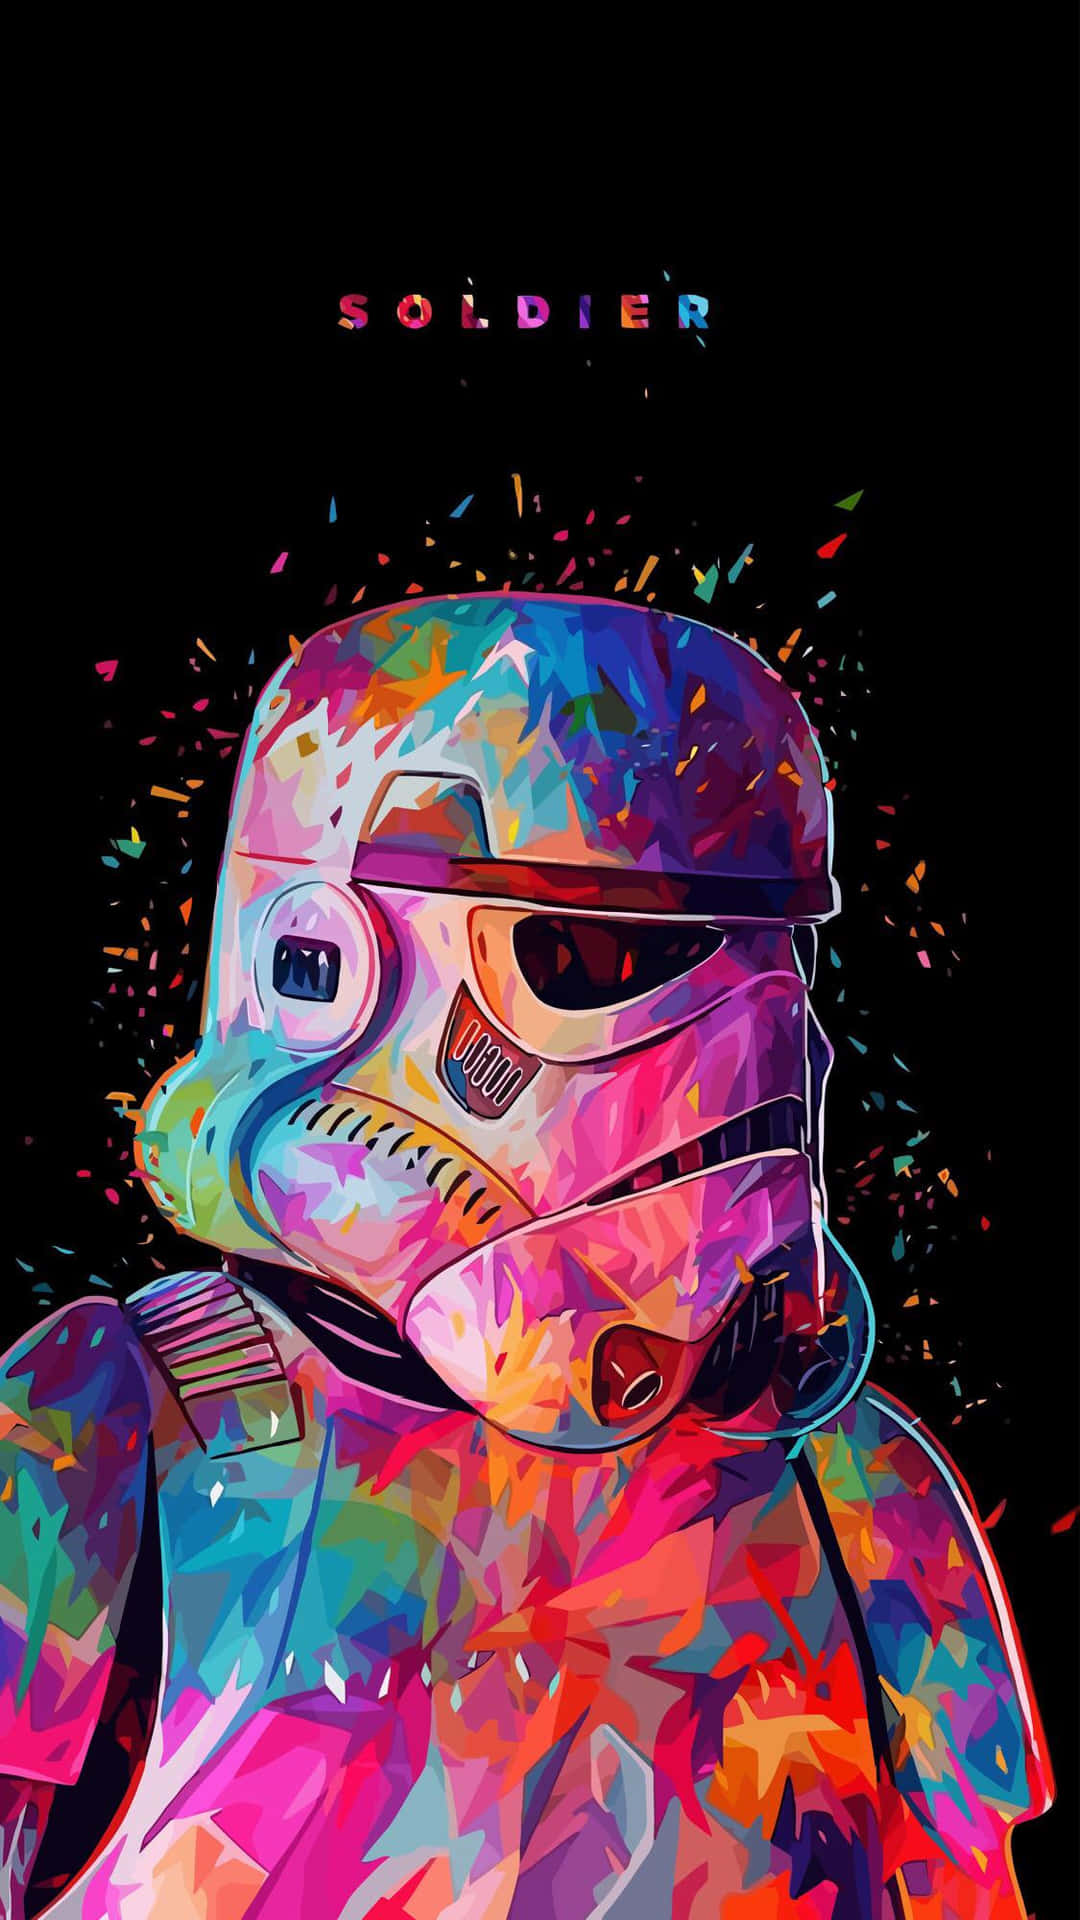 Customize your mobile phone with Star Wars designs! Wallpaper